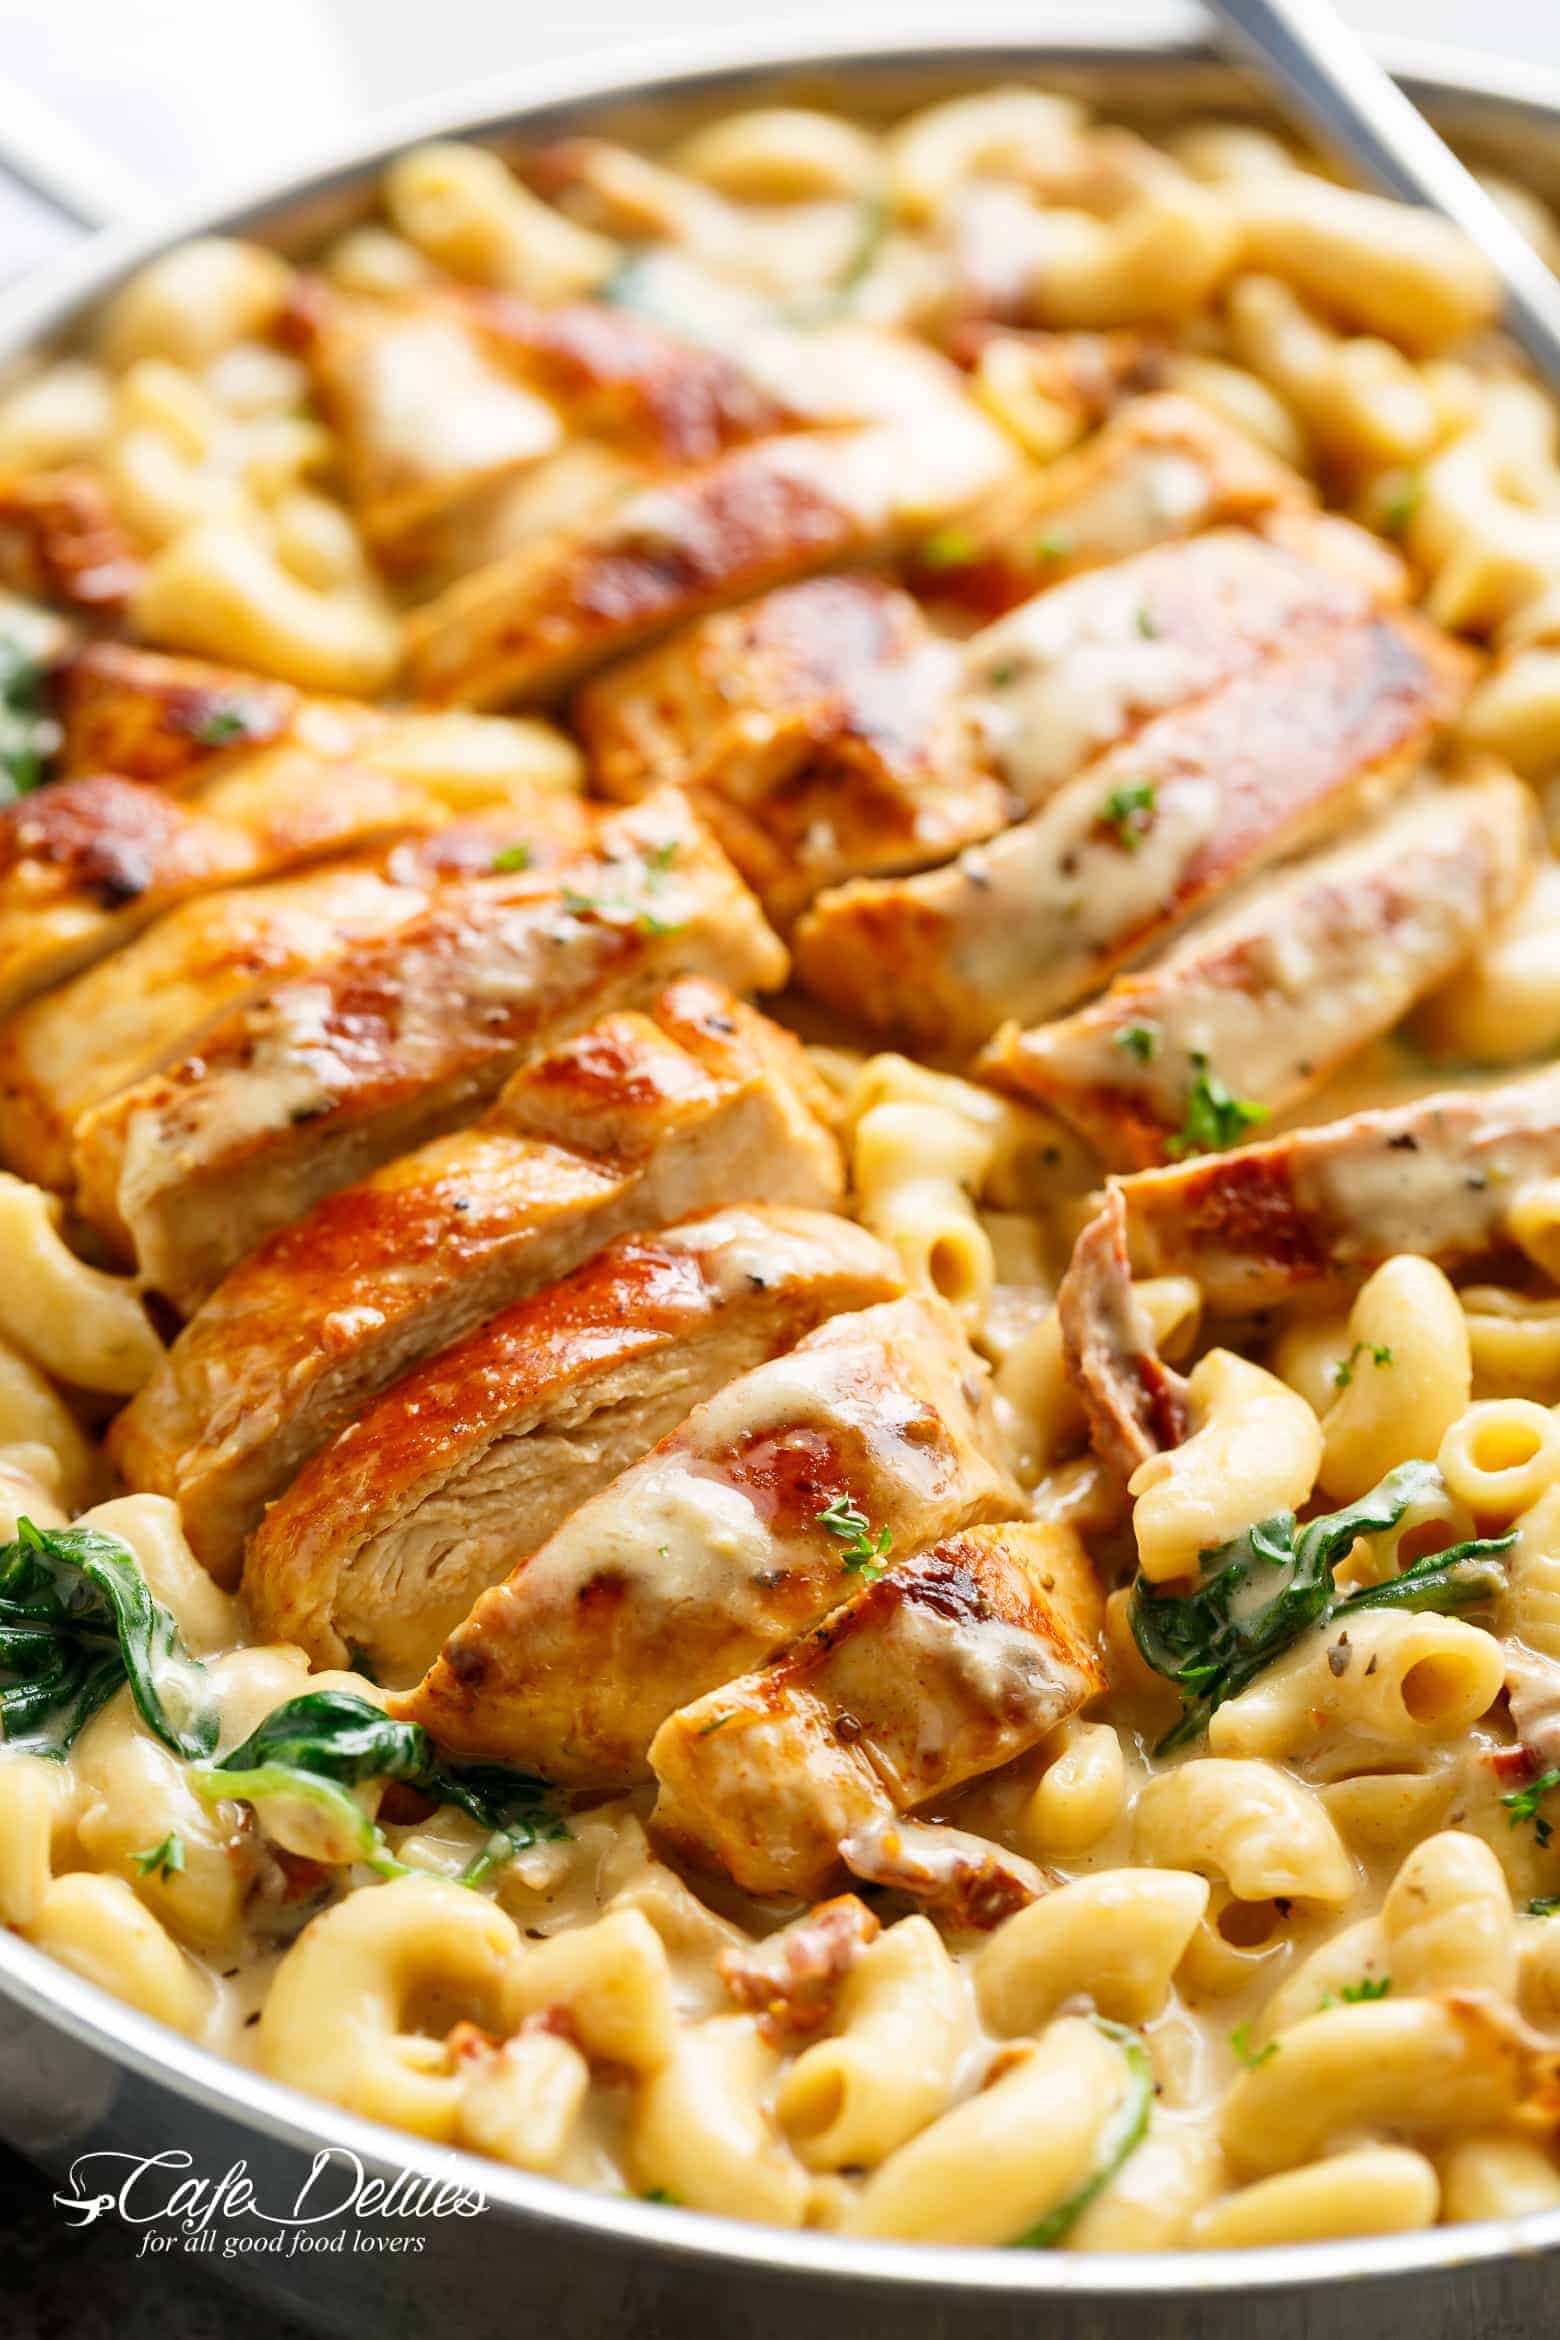 A silver frying pan filled with creamy tuscan style Mac and cheese with wilted spinach and sun dried tomato strips! Two sliced chicken breasts sit on top of Mac and cheese with a serving spoon in the pan ready to serve!